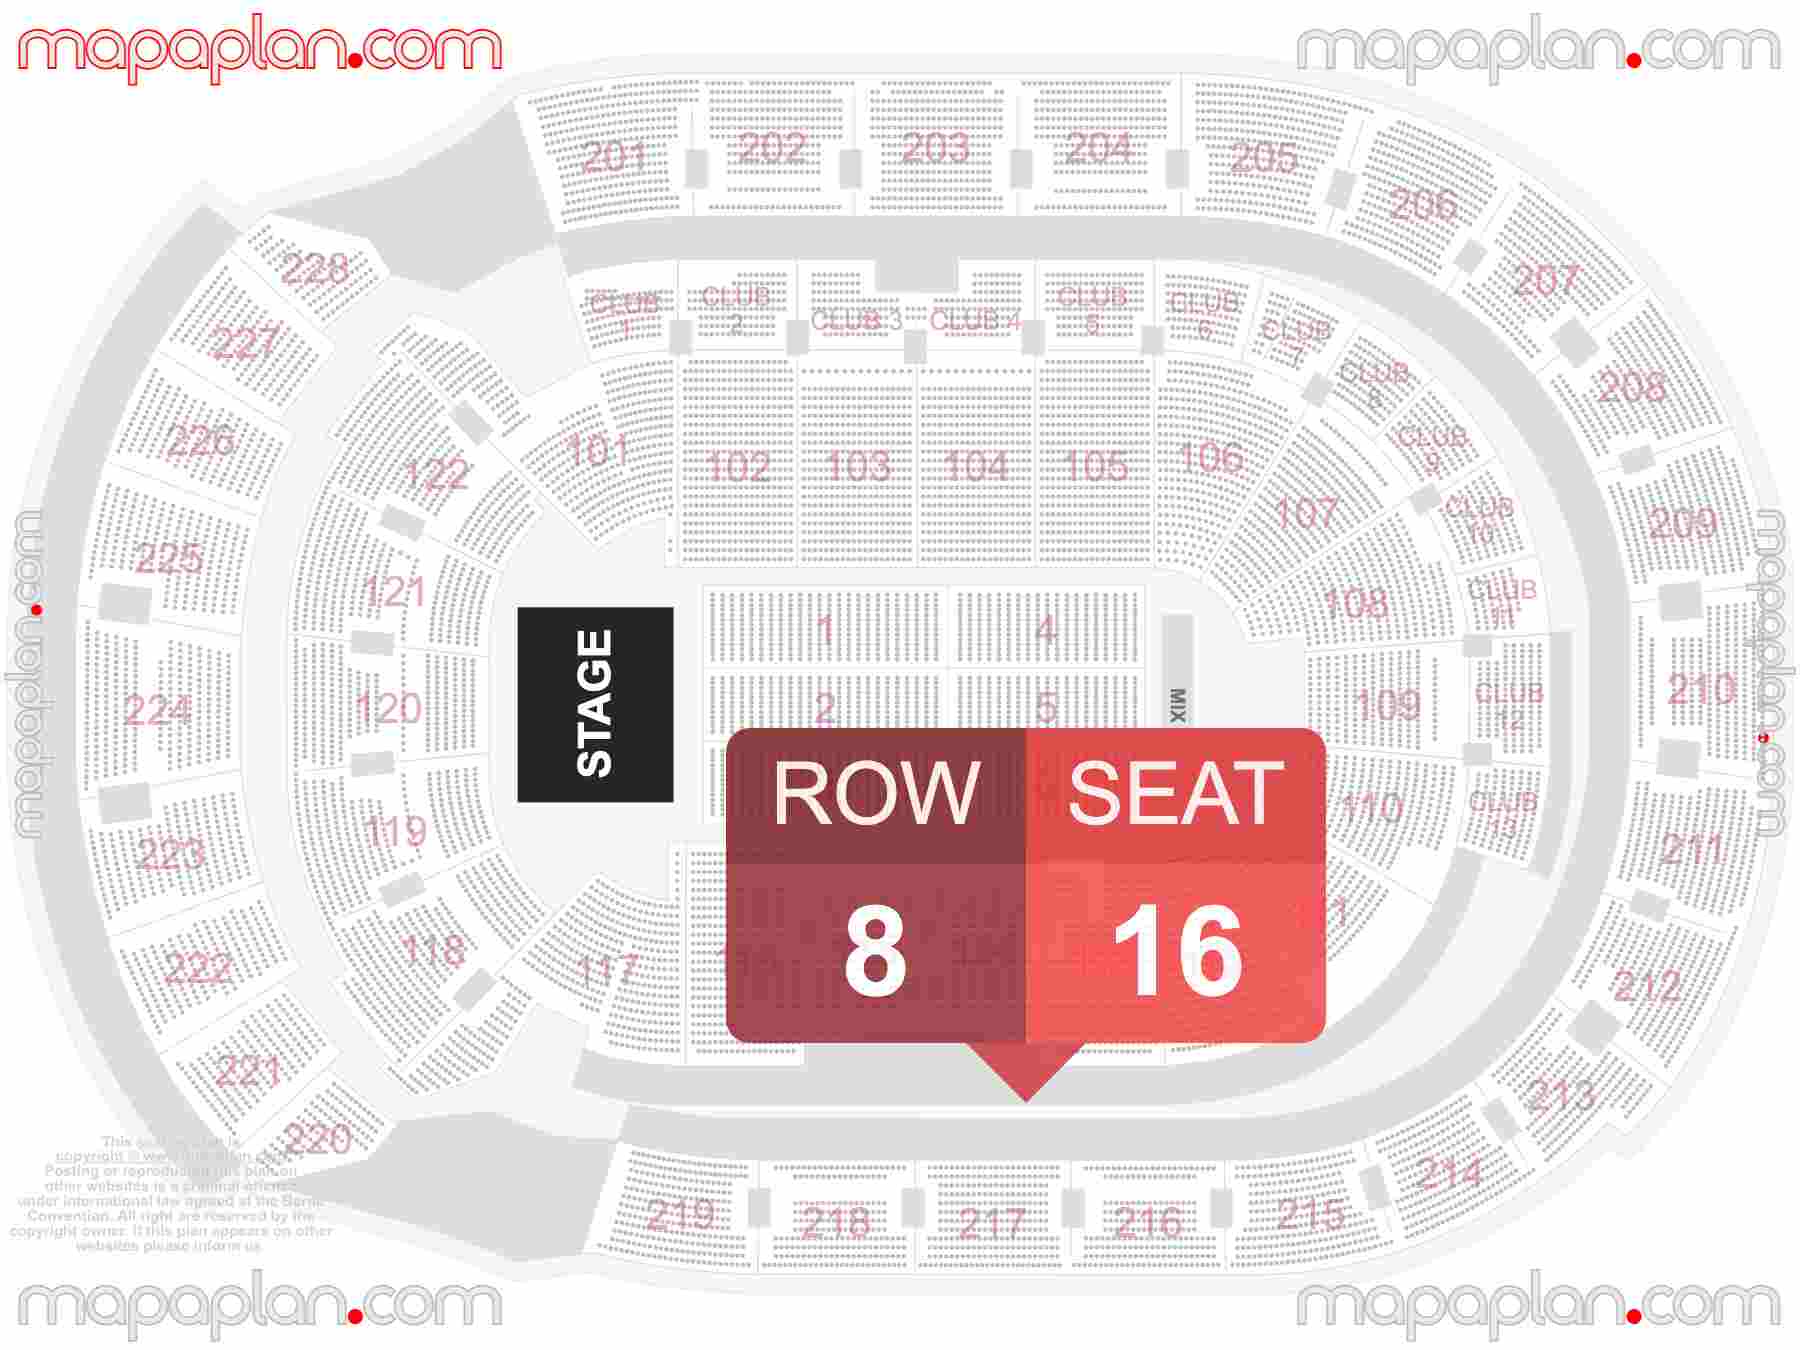 Columbus Nationwide Arena seating chart Concert detailed seat numbers and row numbering chart with interactive map plan layout